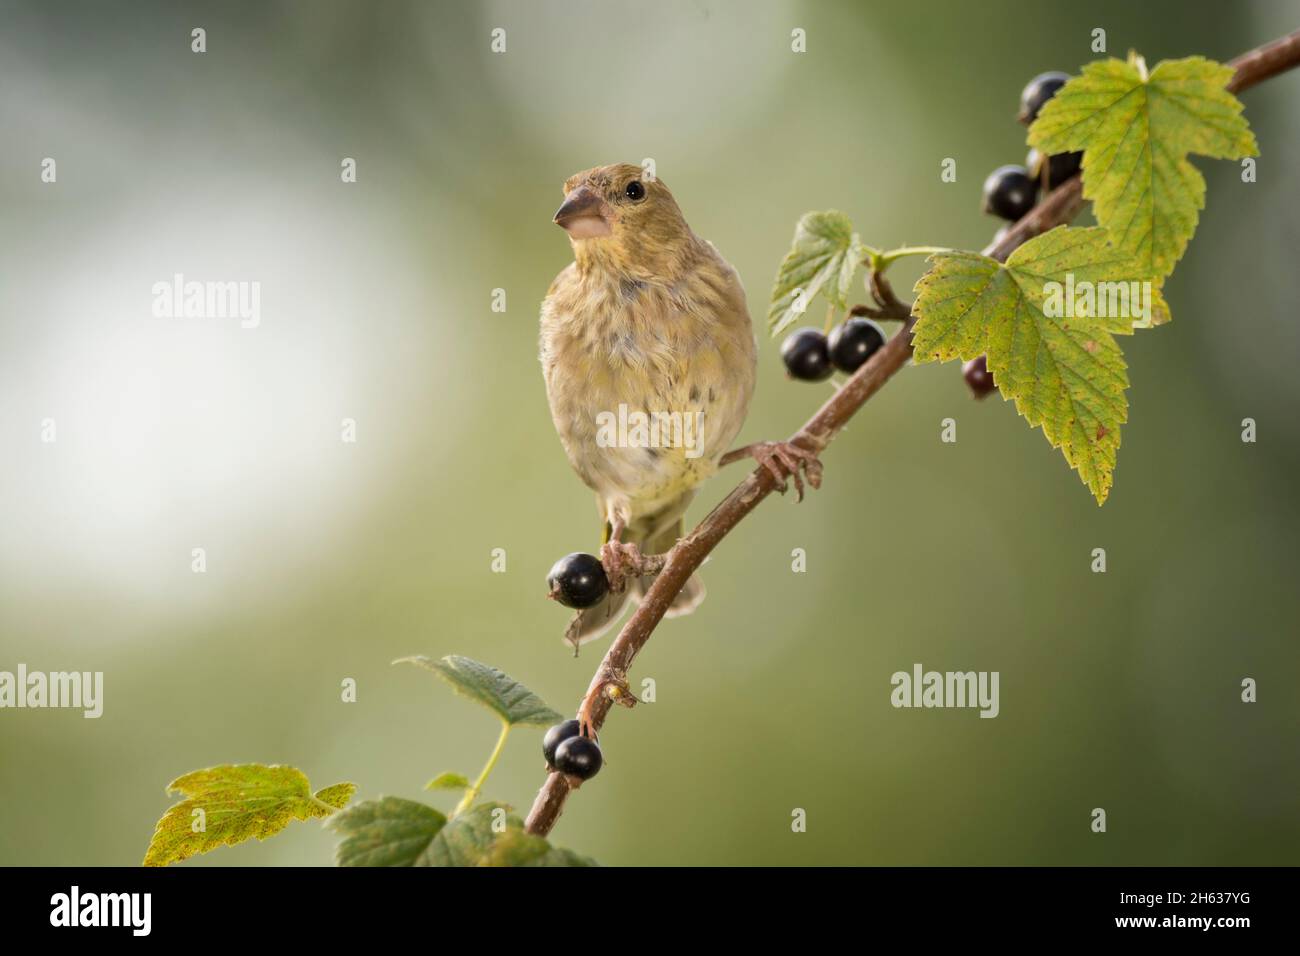 green finch is standing on black currant branches Stock Photo